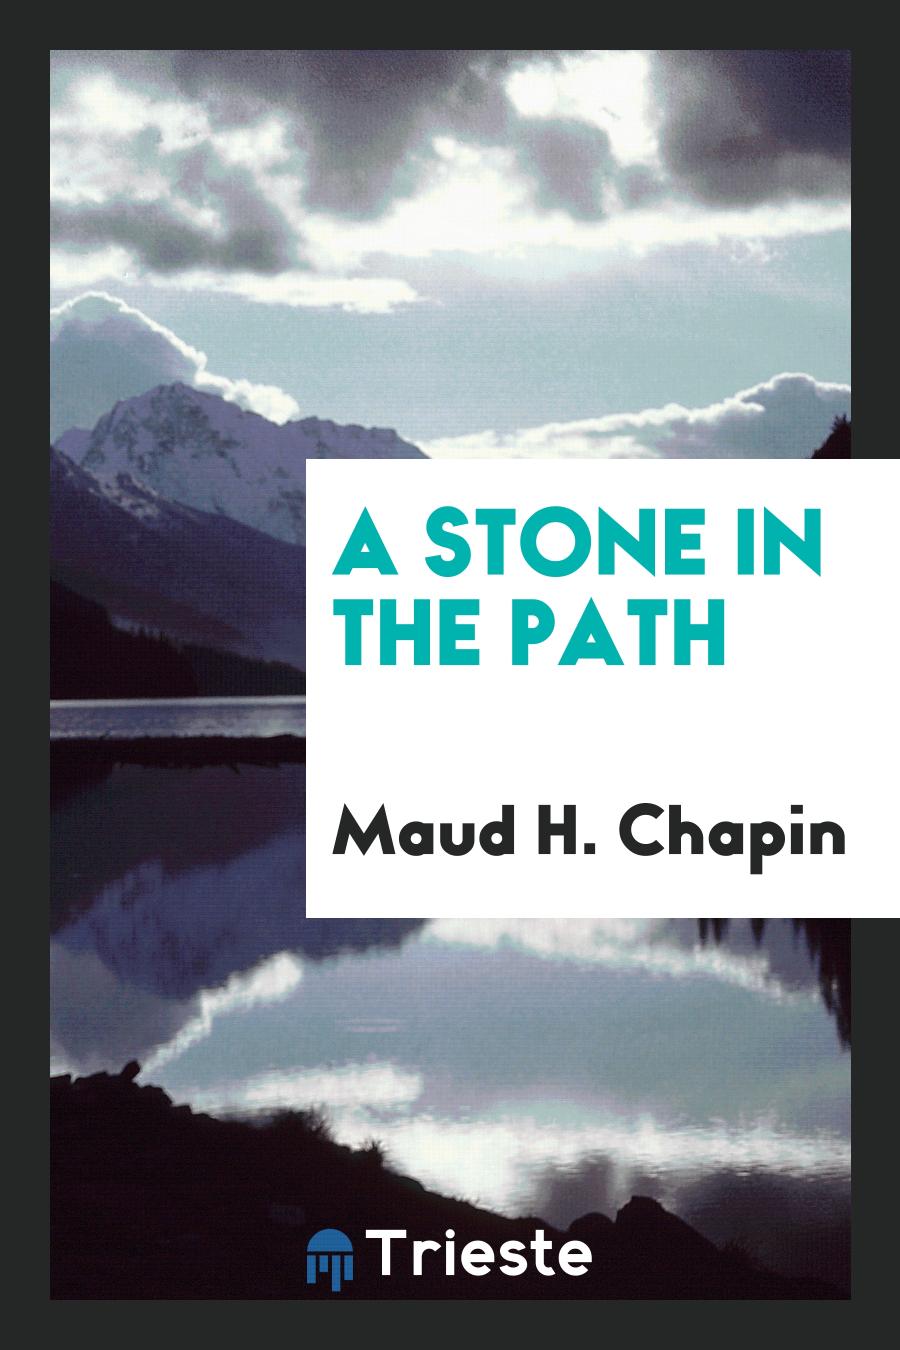 A Stone in the Path